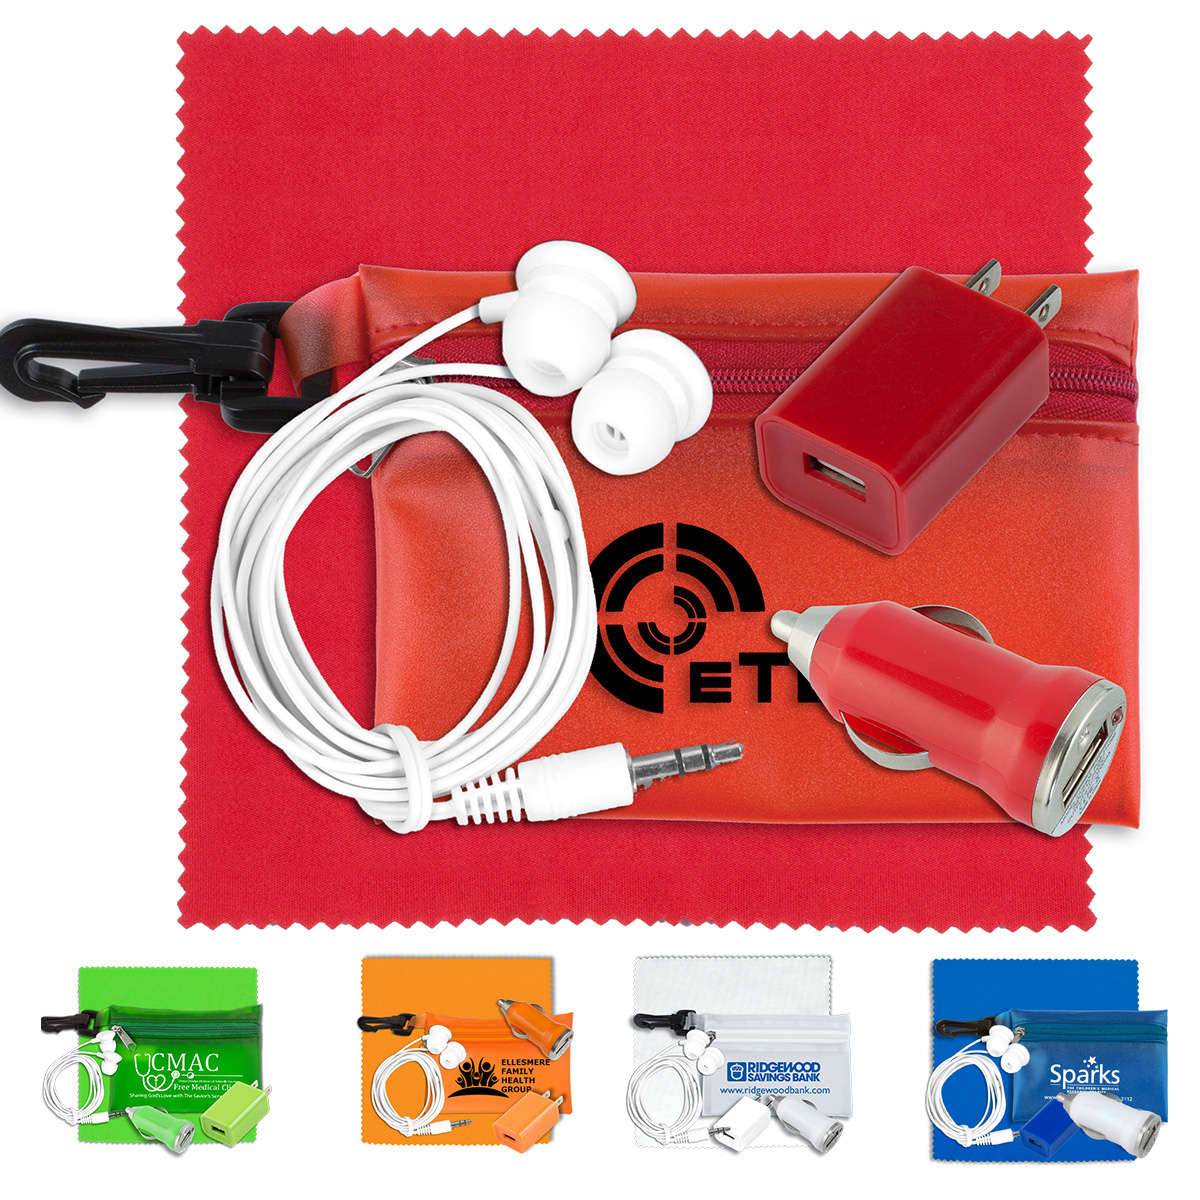 "TONS-O-TUNES" Mobile Tech Auto and Home Accessory Kit in Translucent Carabiner Zipper Pouch